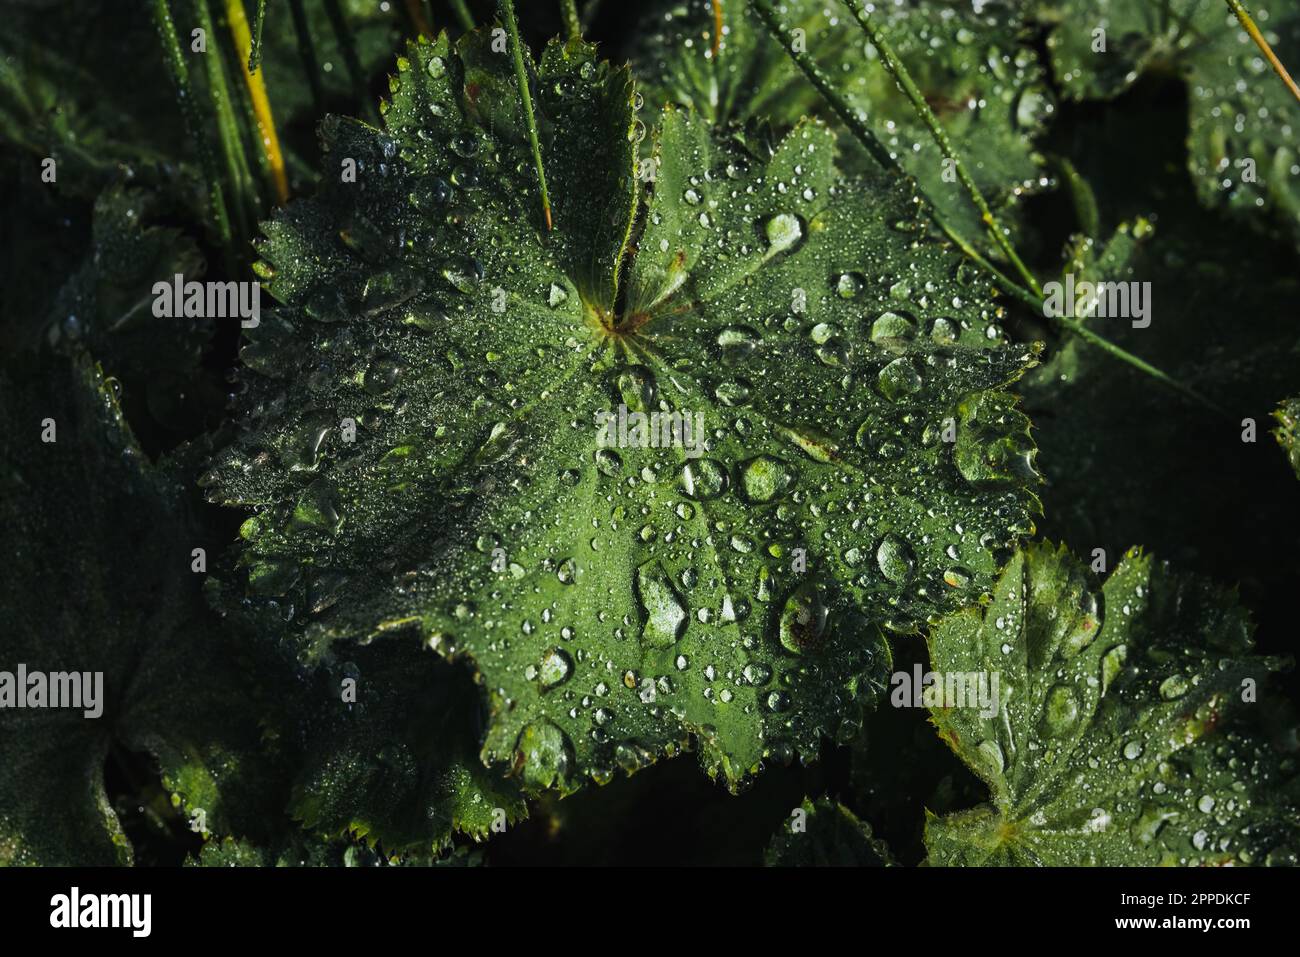 Makro shot of a leaf with raindrops on it Stock Photo